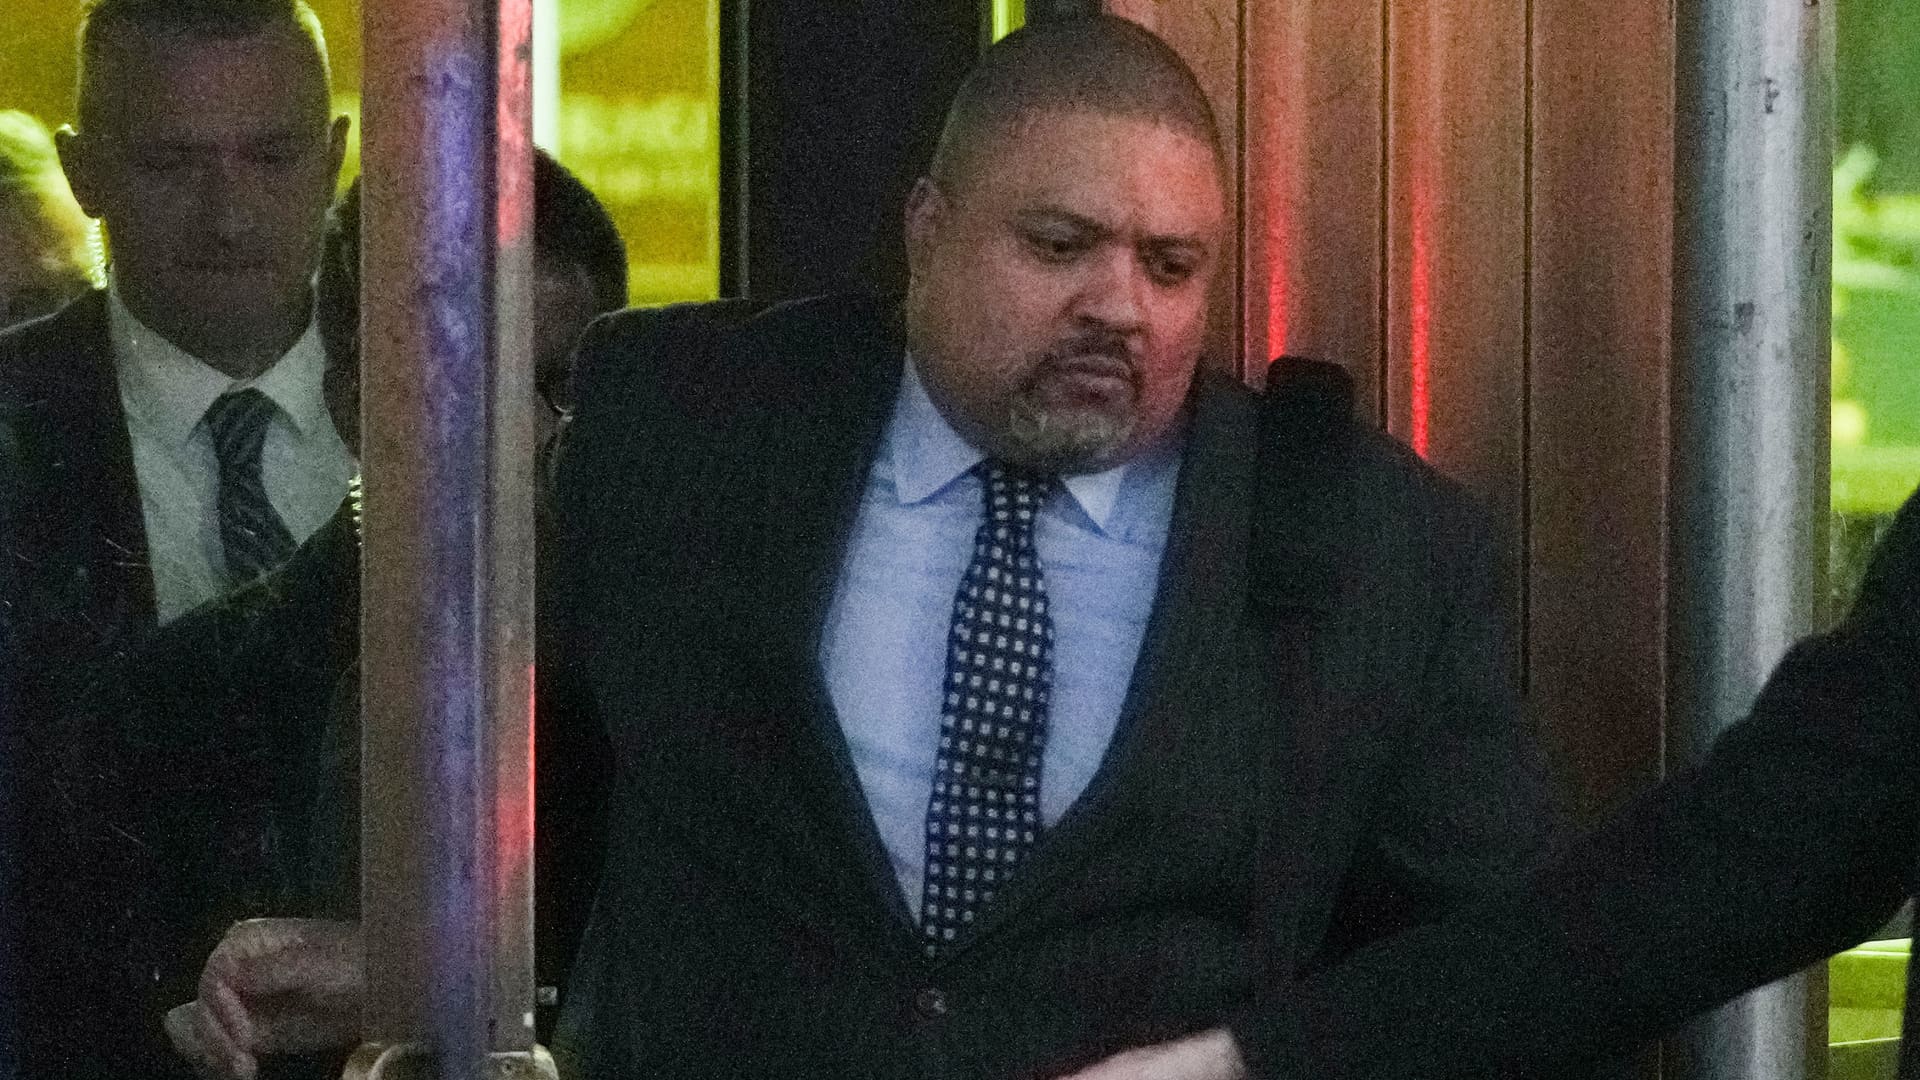 New York District Attorney Alvin Bragg leaves after former U.S. President Donald Trump's indictment by a Manhattan grand jury following a probe into hush money paid to porn star Stormy Daniels, in New York City, U.S., March 30, 2023.  